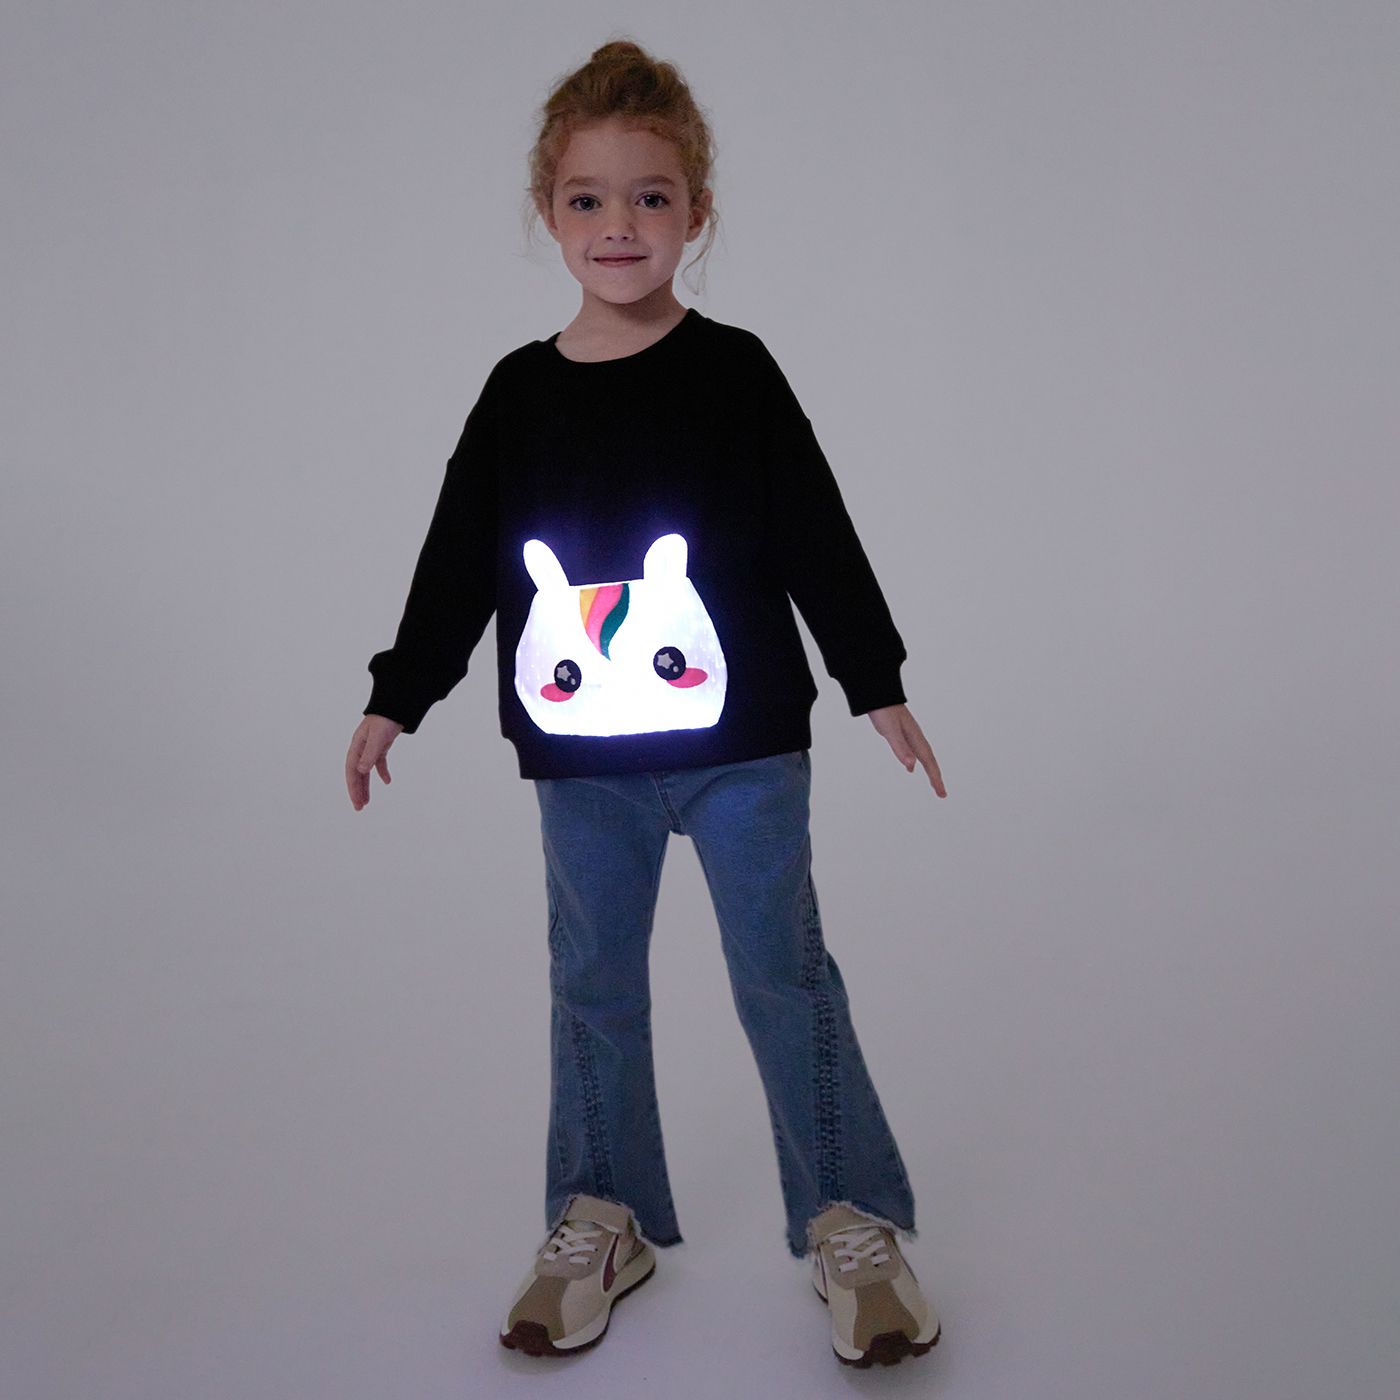 Go-Glow Illuminating Sweatshirt With Light Up Unicorn Including Controller (Built-In Battery)